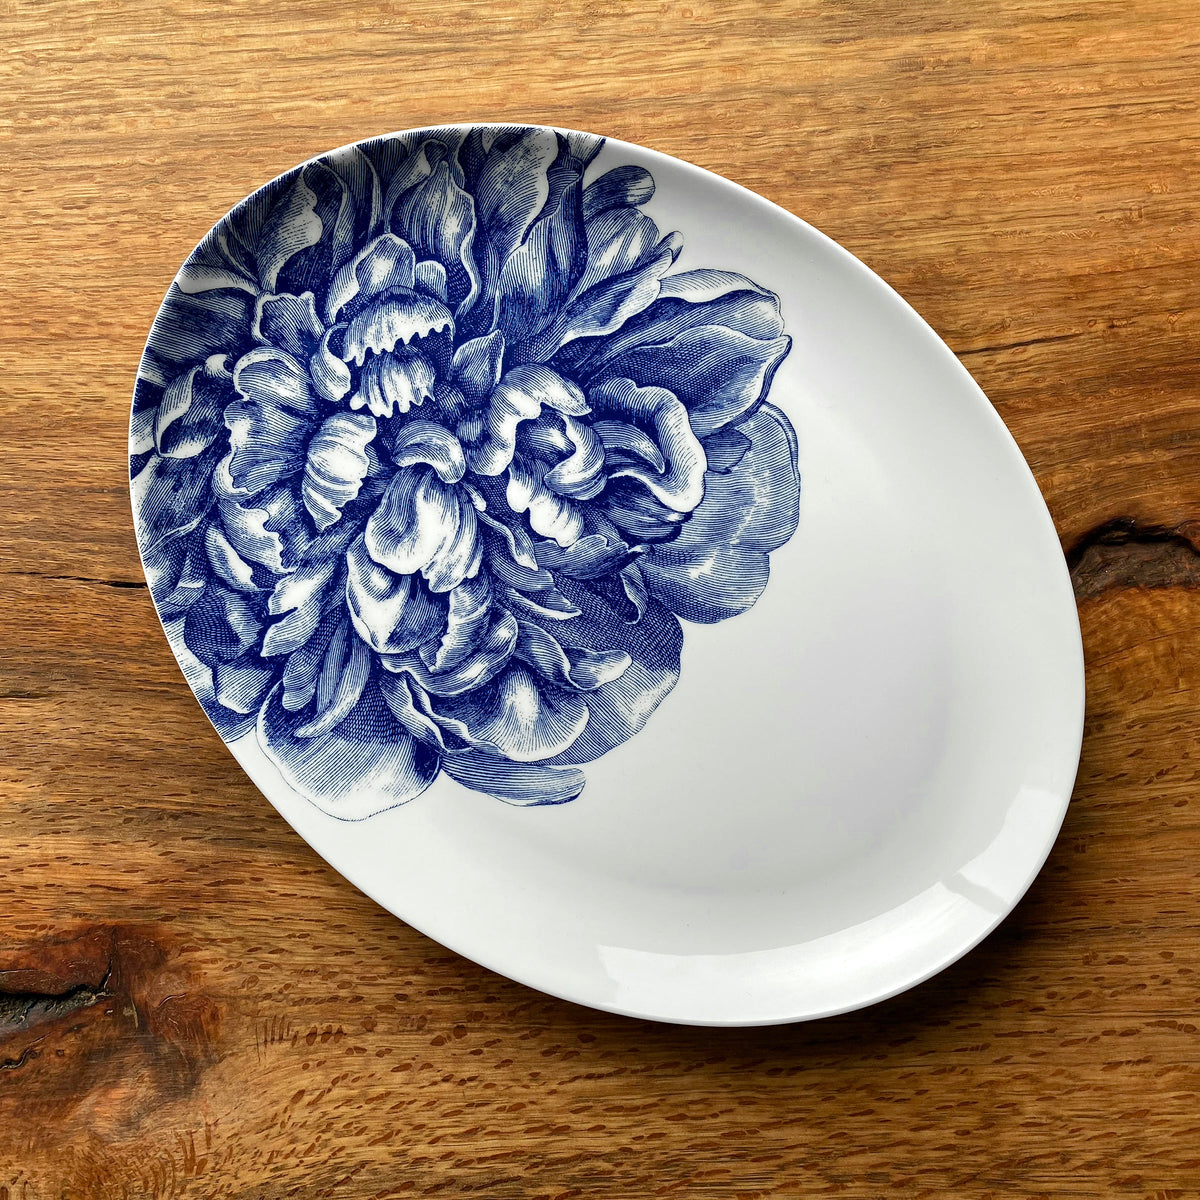 A Peony Blue Medium Coupe Oval Platter with a floral design on it by Caskata Artisanal Home.